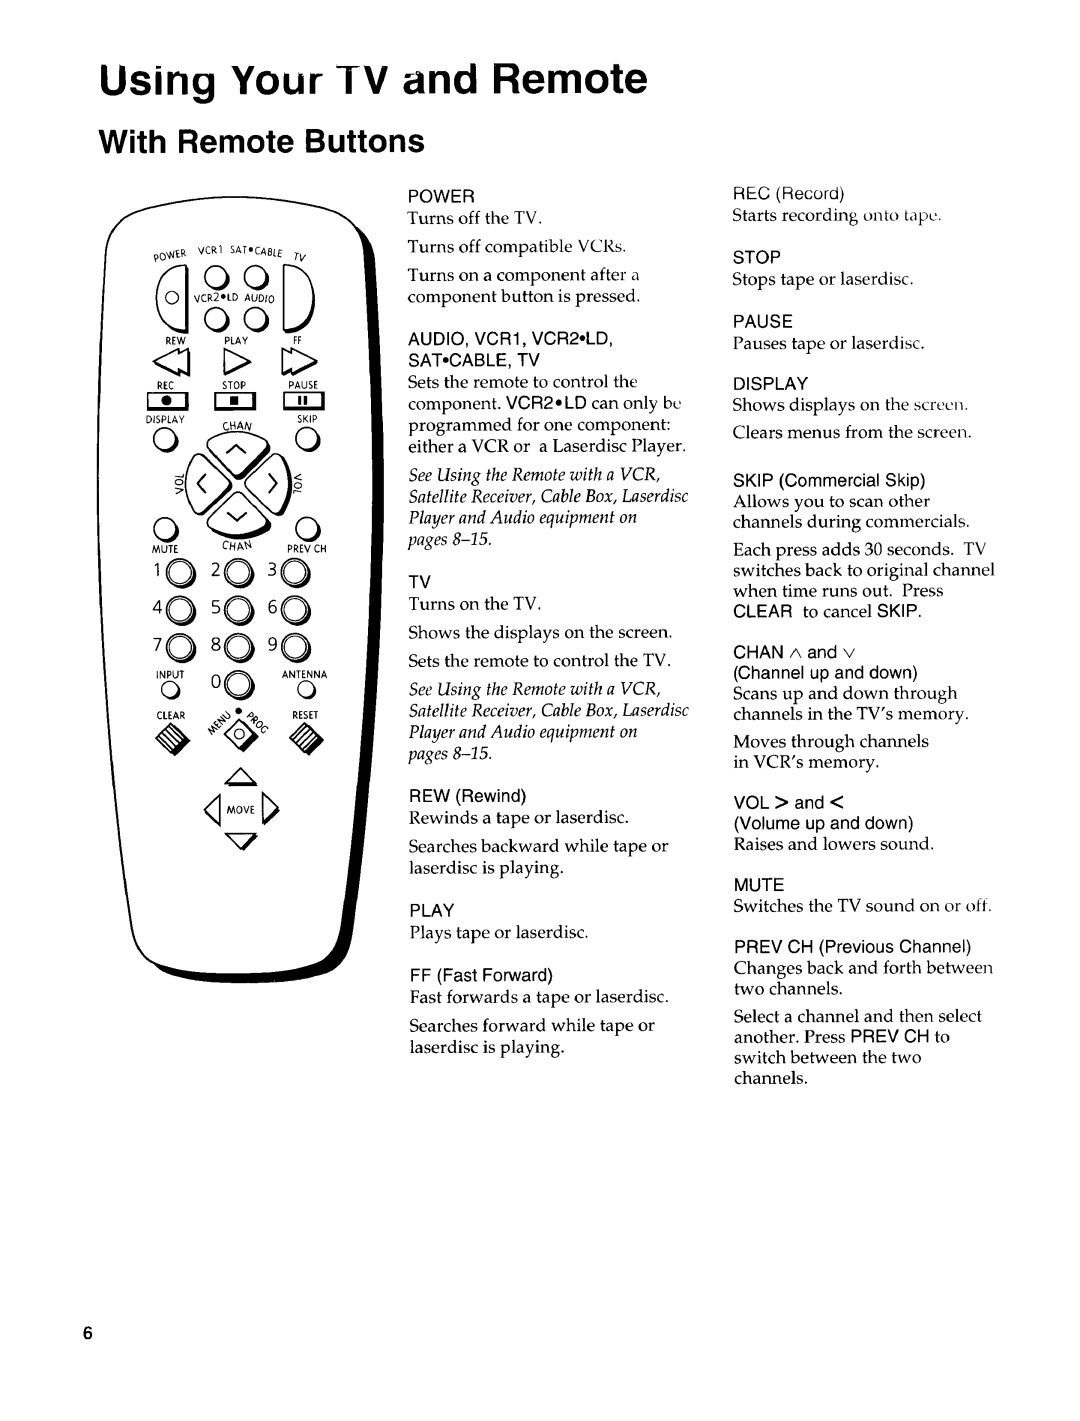 Sears 274.4372859 owner manual With Remote Buttons 